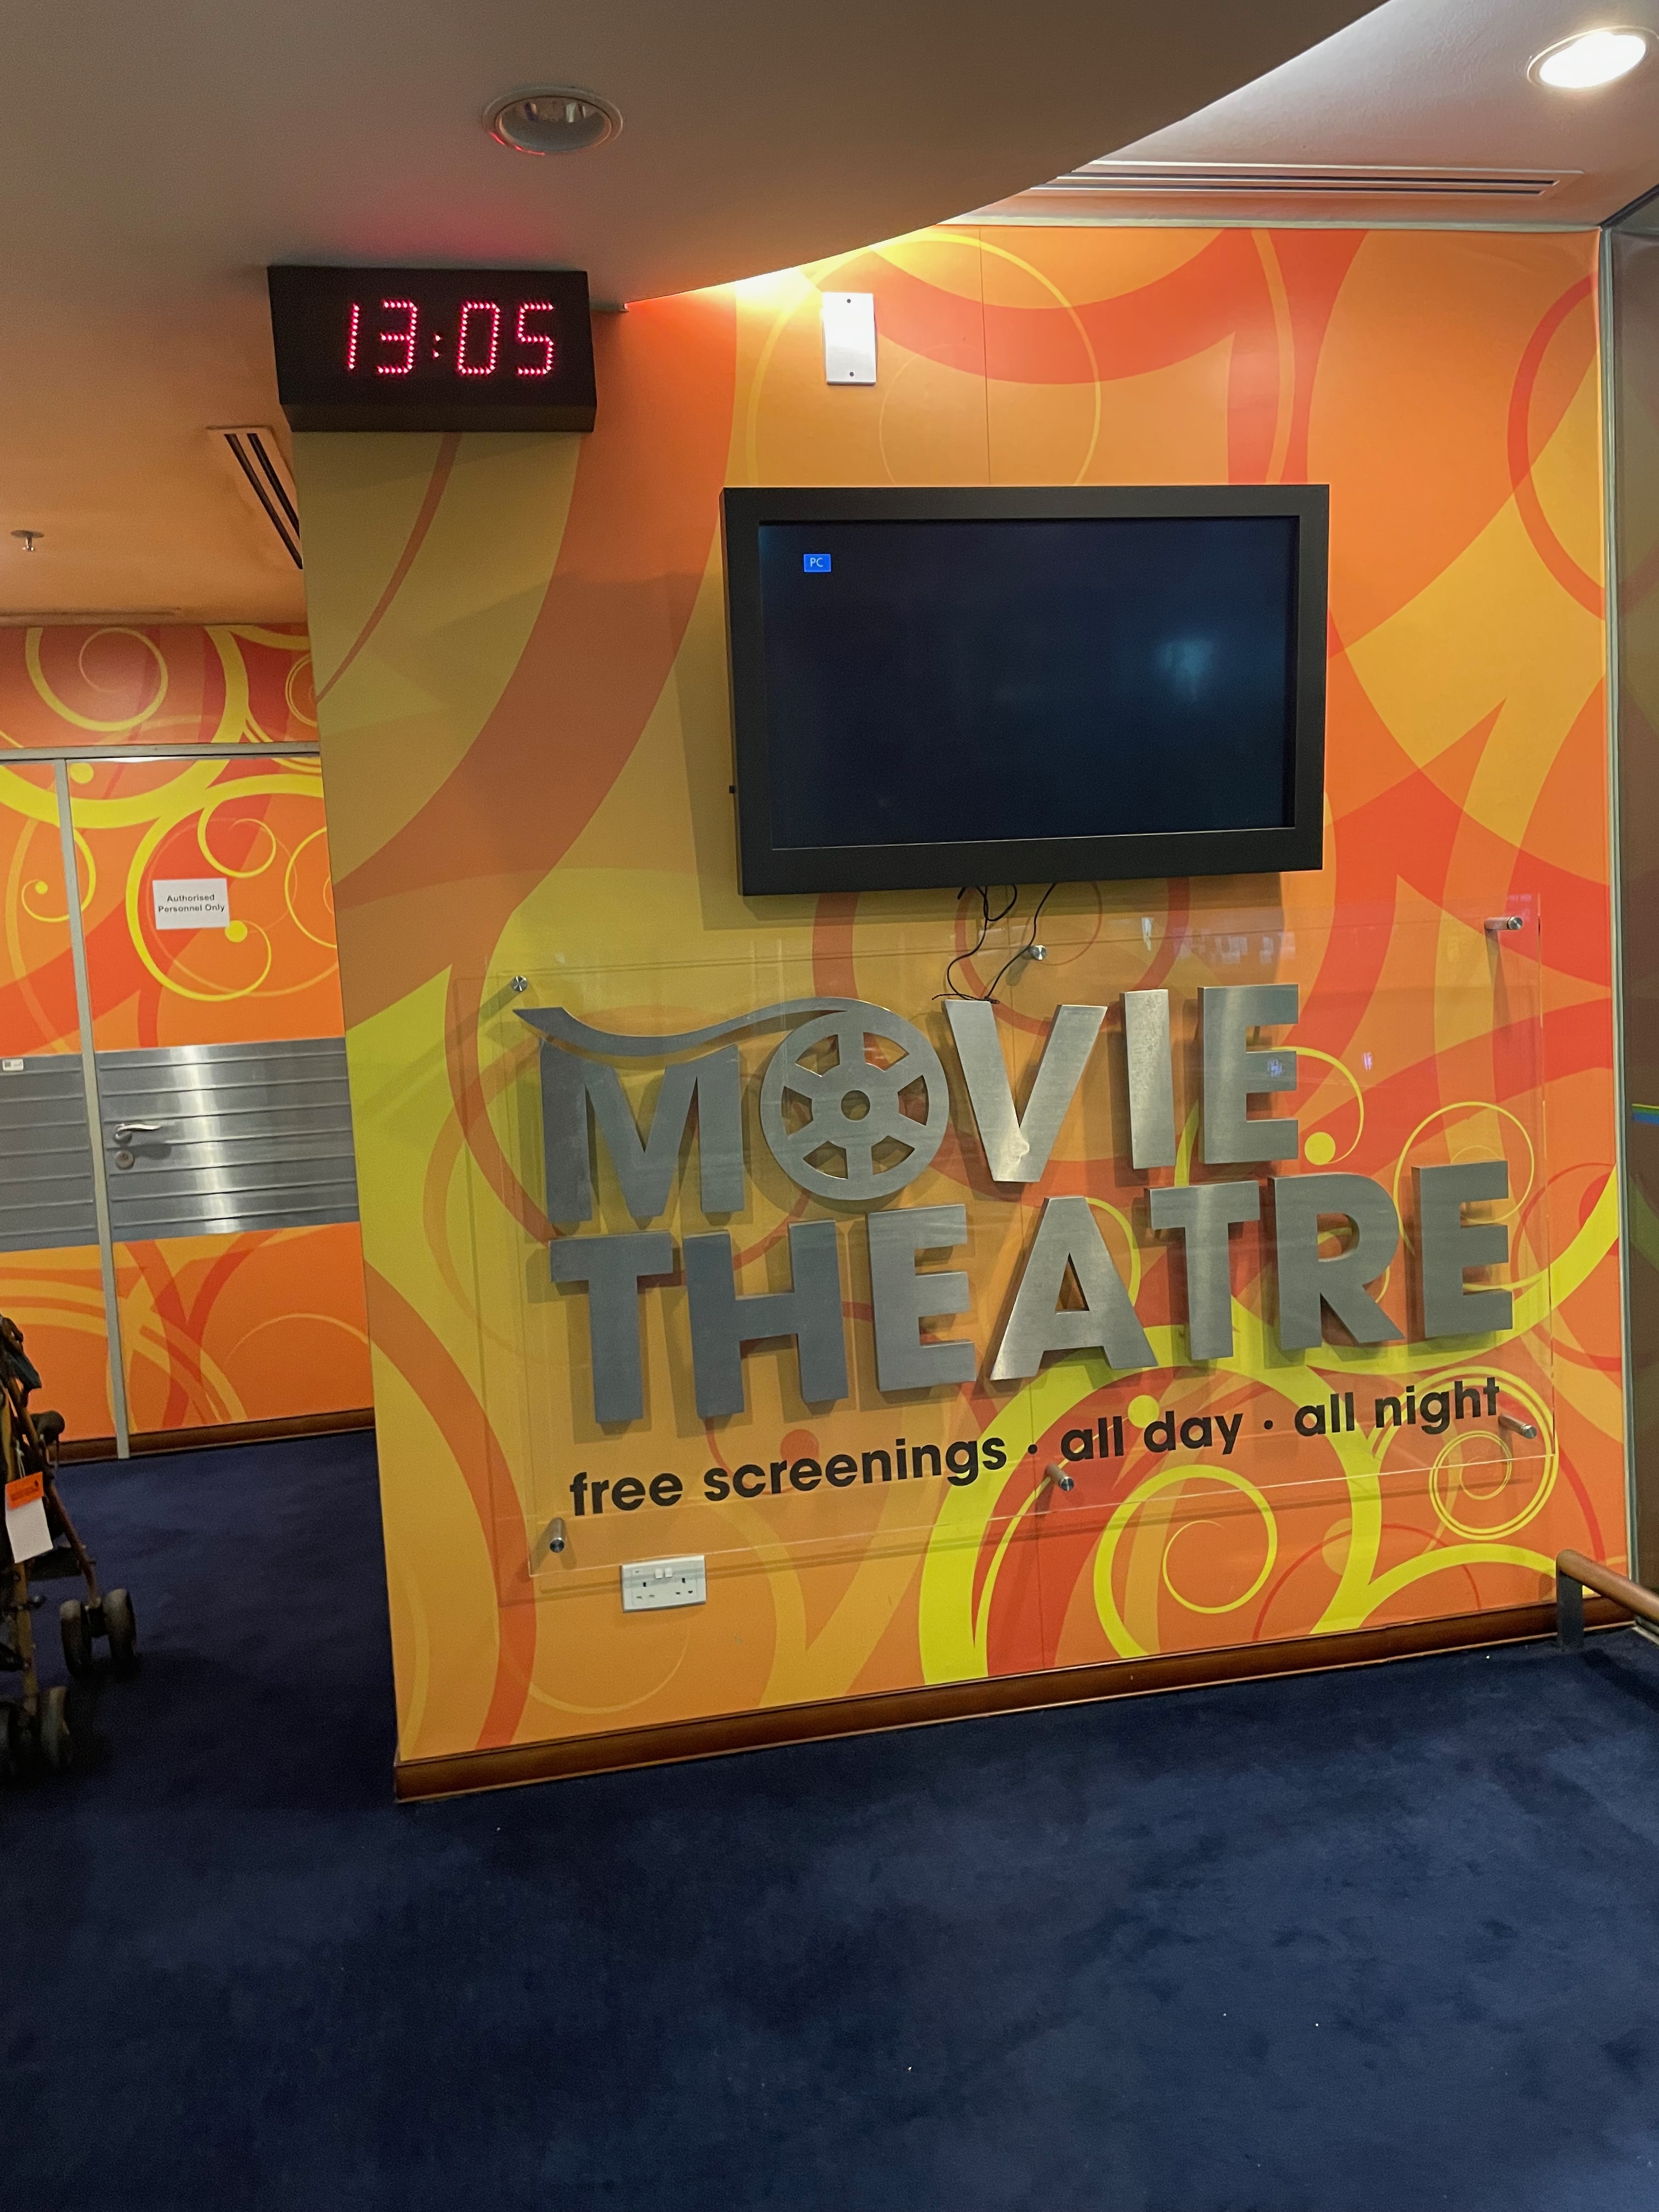 Of course there is a movie theatre in Changi Airport